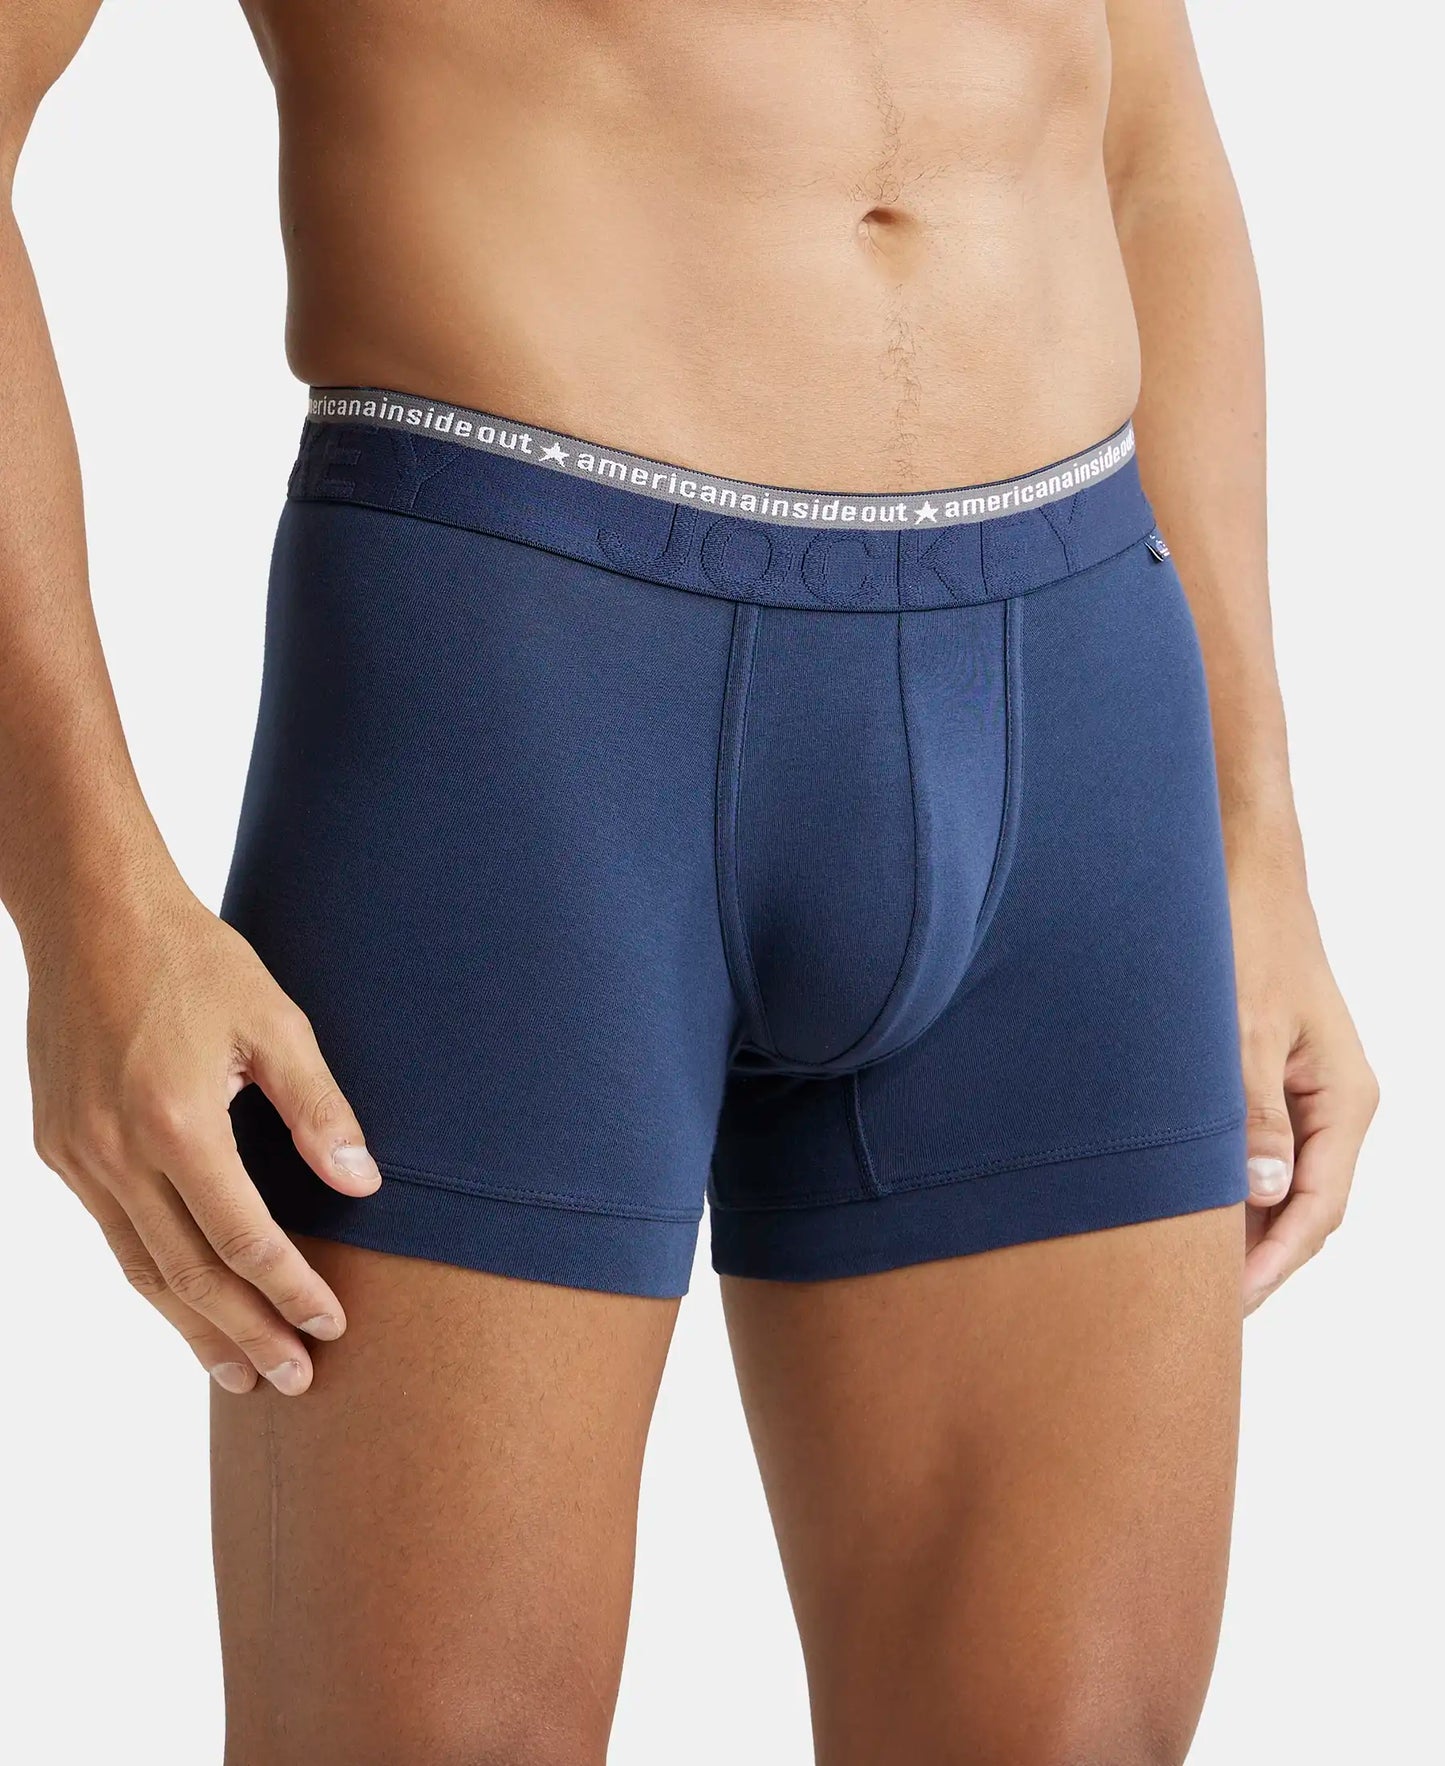 Super Combed Cotton Elastane Solid Trunk with Ultrasoft Waistband - Navy-2